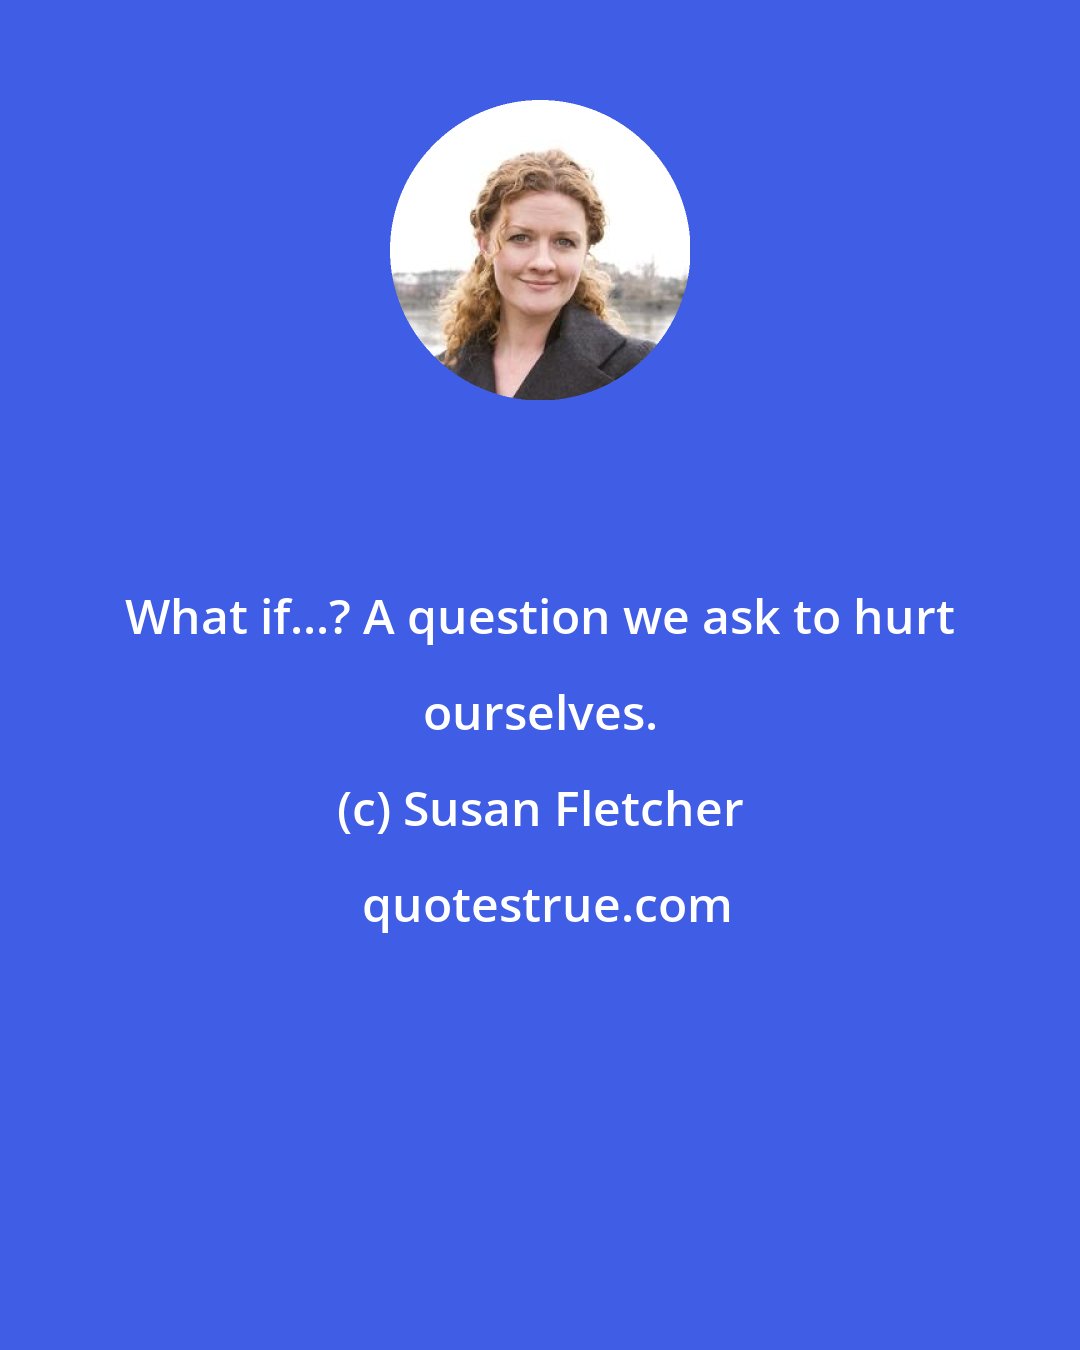 Susan Fletcher: What if...? A question we ask to hurt ourselves.